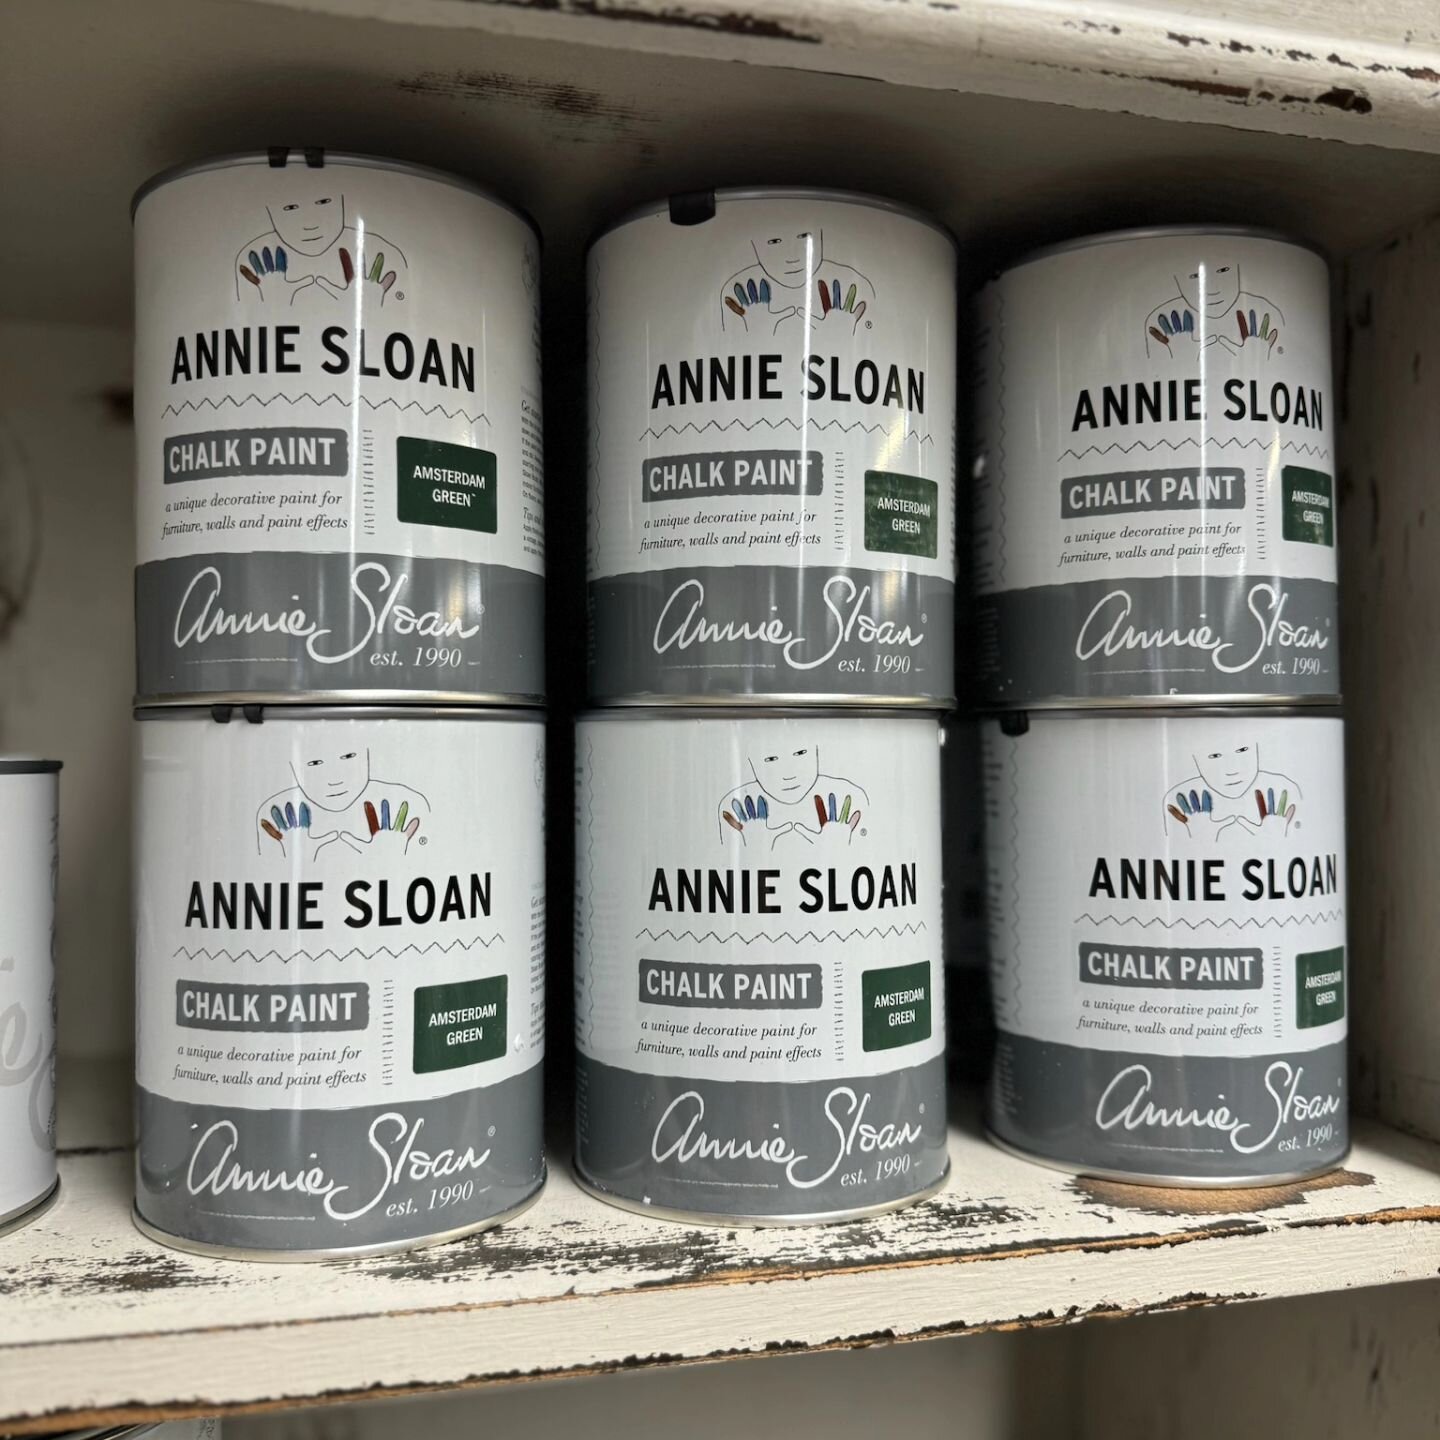 #anniesloanchalkpaint #amsterdamgreen #bozemanmontana #chalkpaint #chalkpaintedfurniture 
AMSTERDAM 💚 GREEN
back in stock!!!!